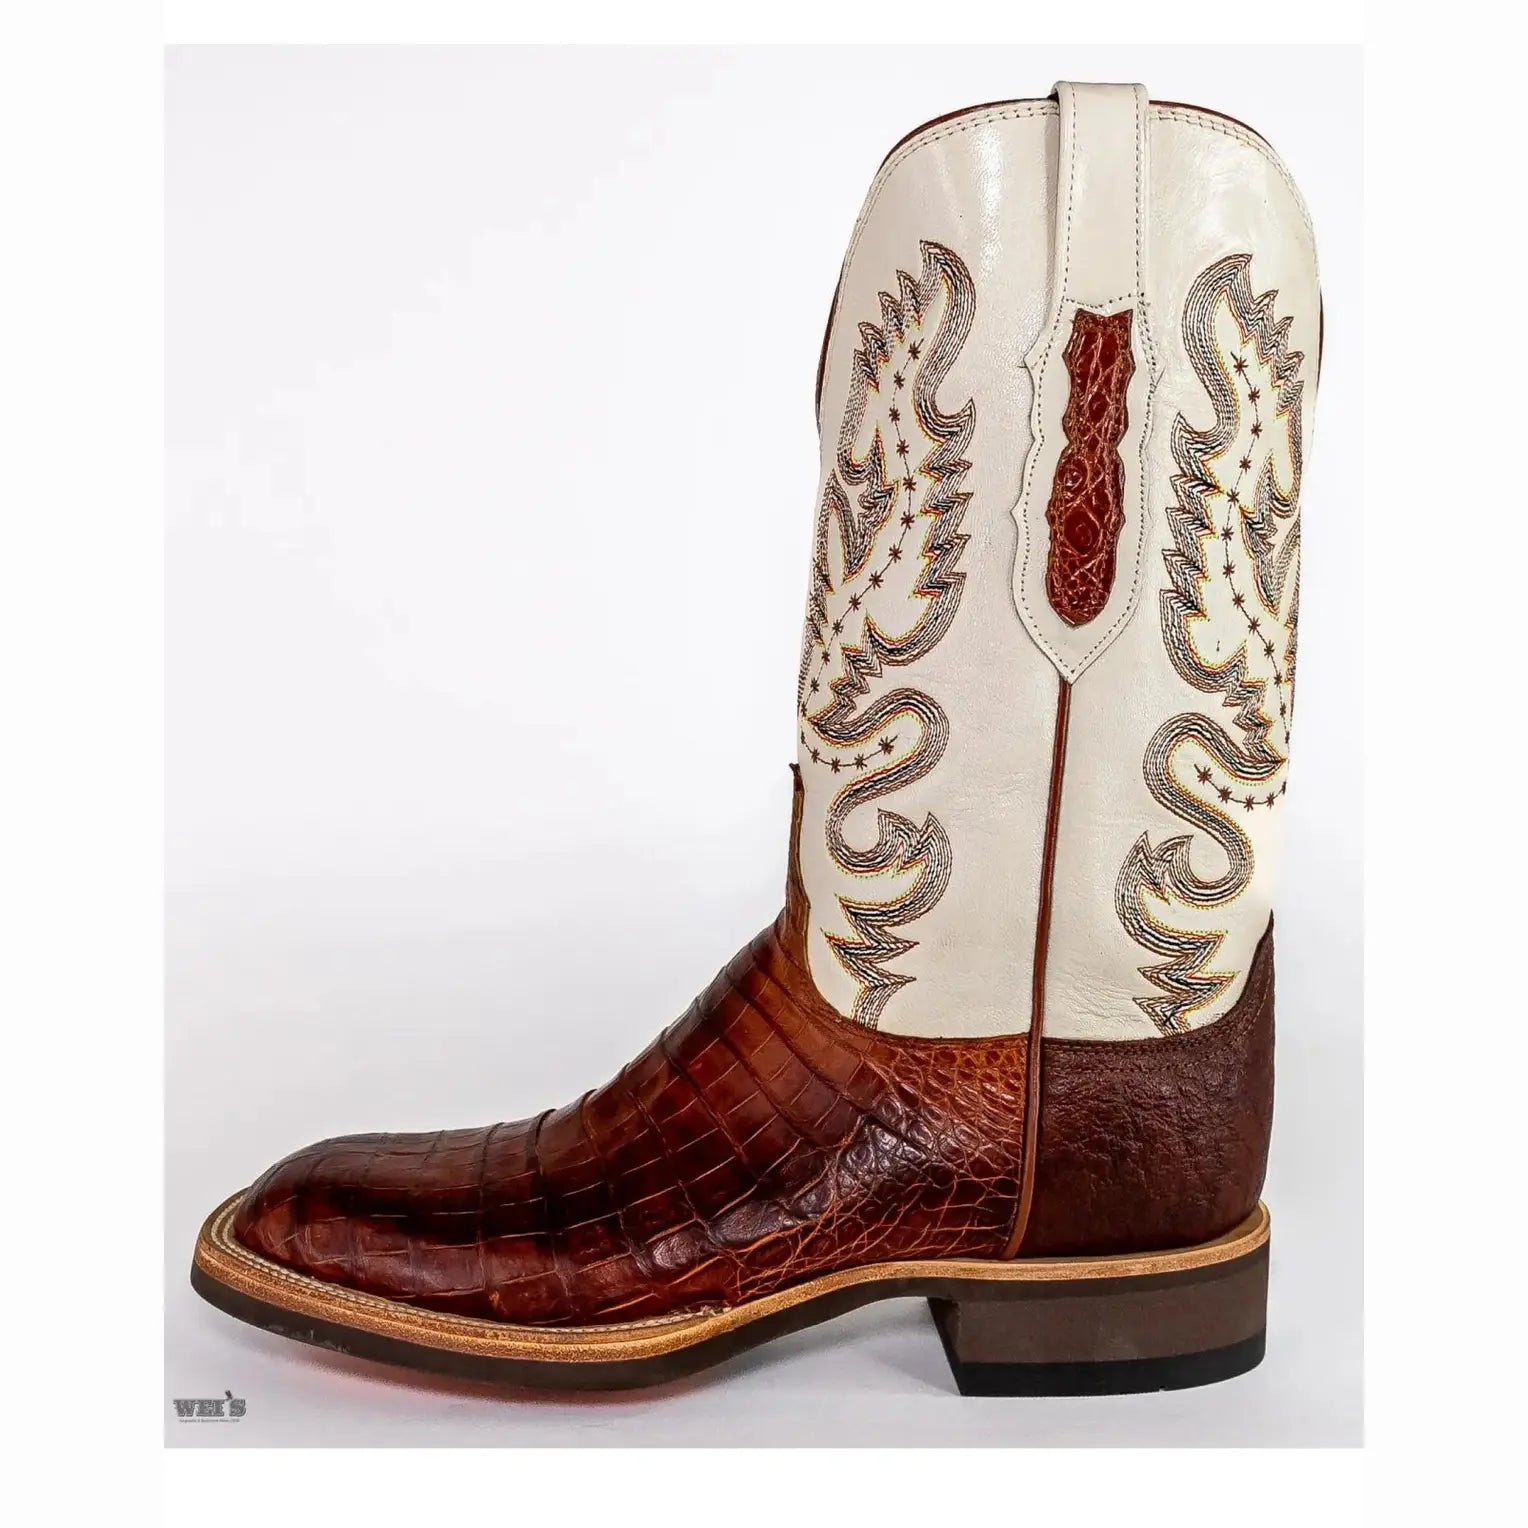 Lucchese 1883 Men's Cowboy Boots 14" Caiman Ox Wide Square Toe CX1005.W8